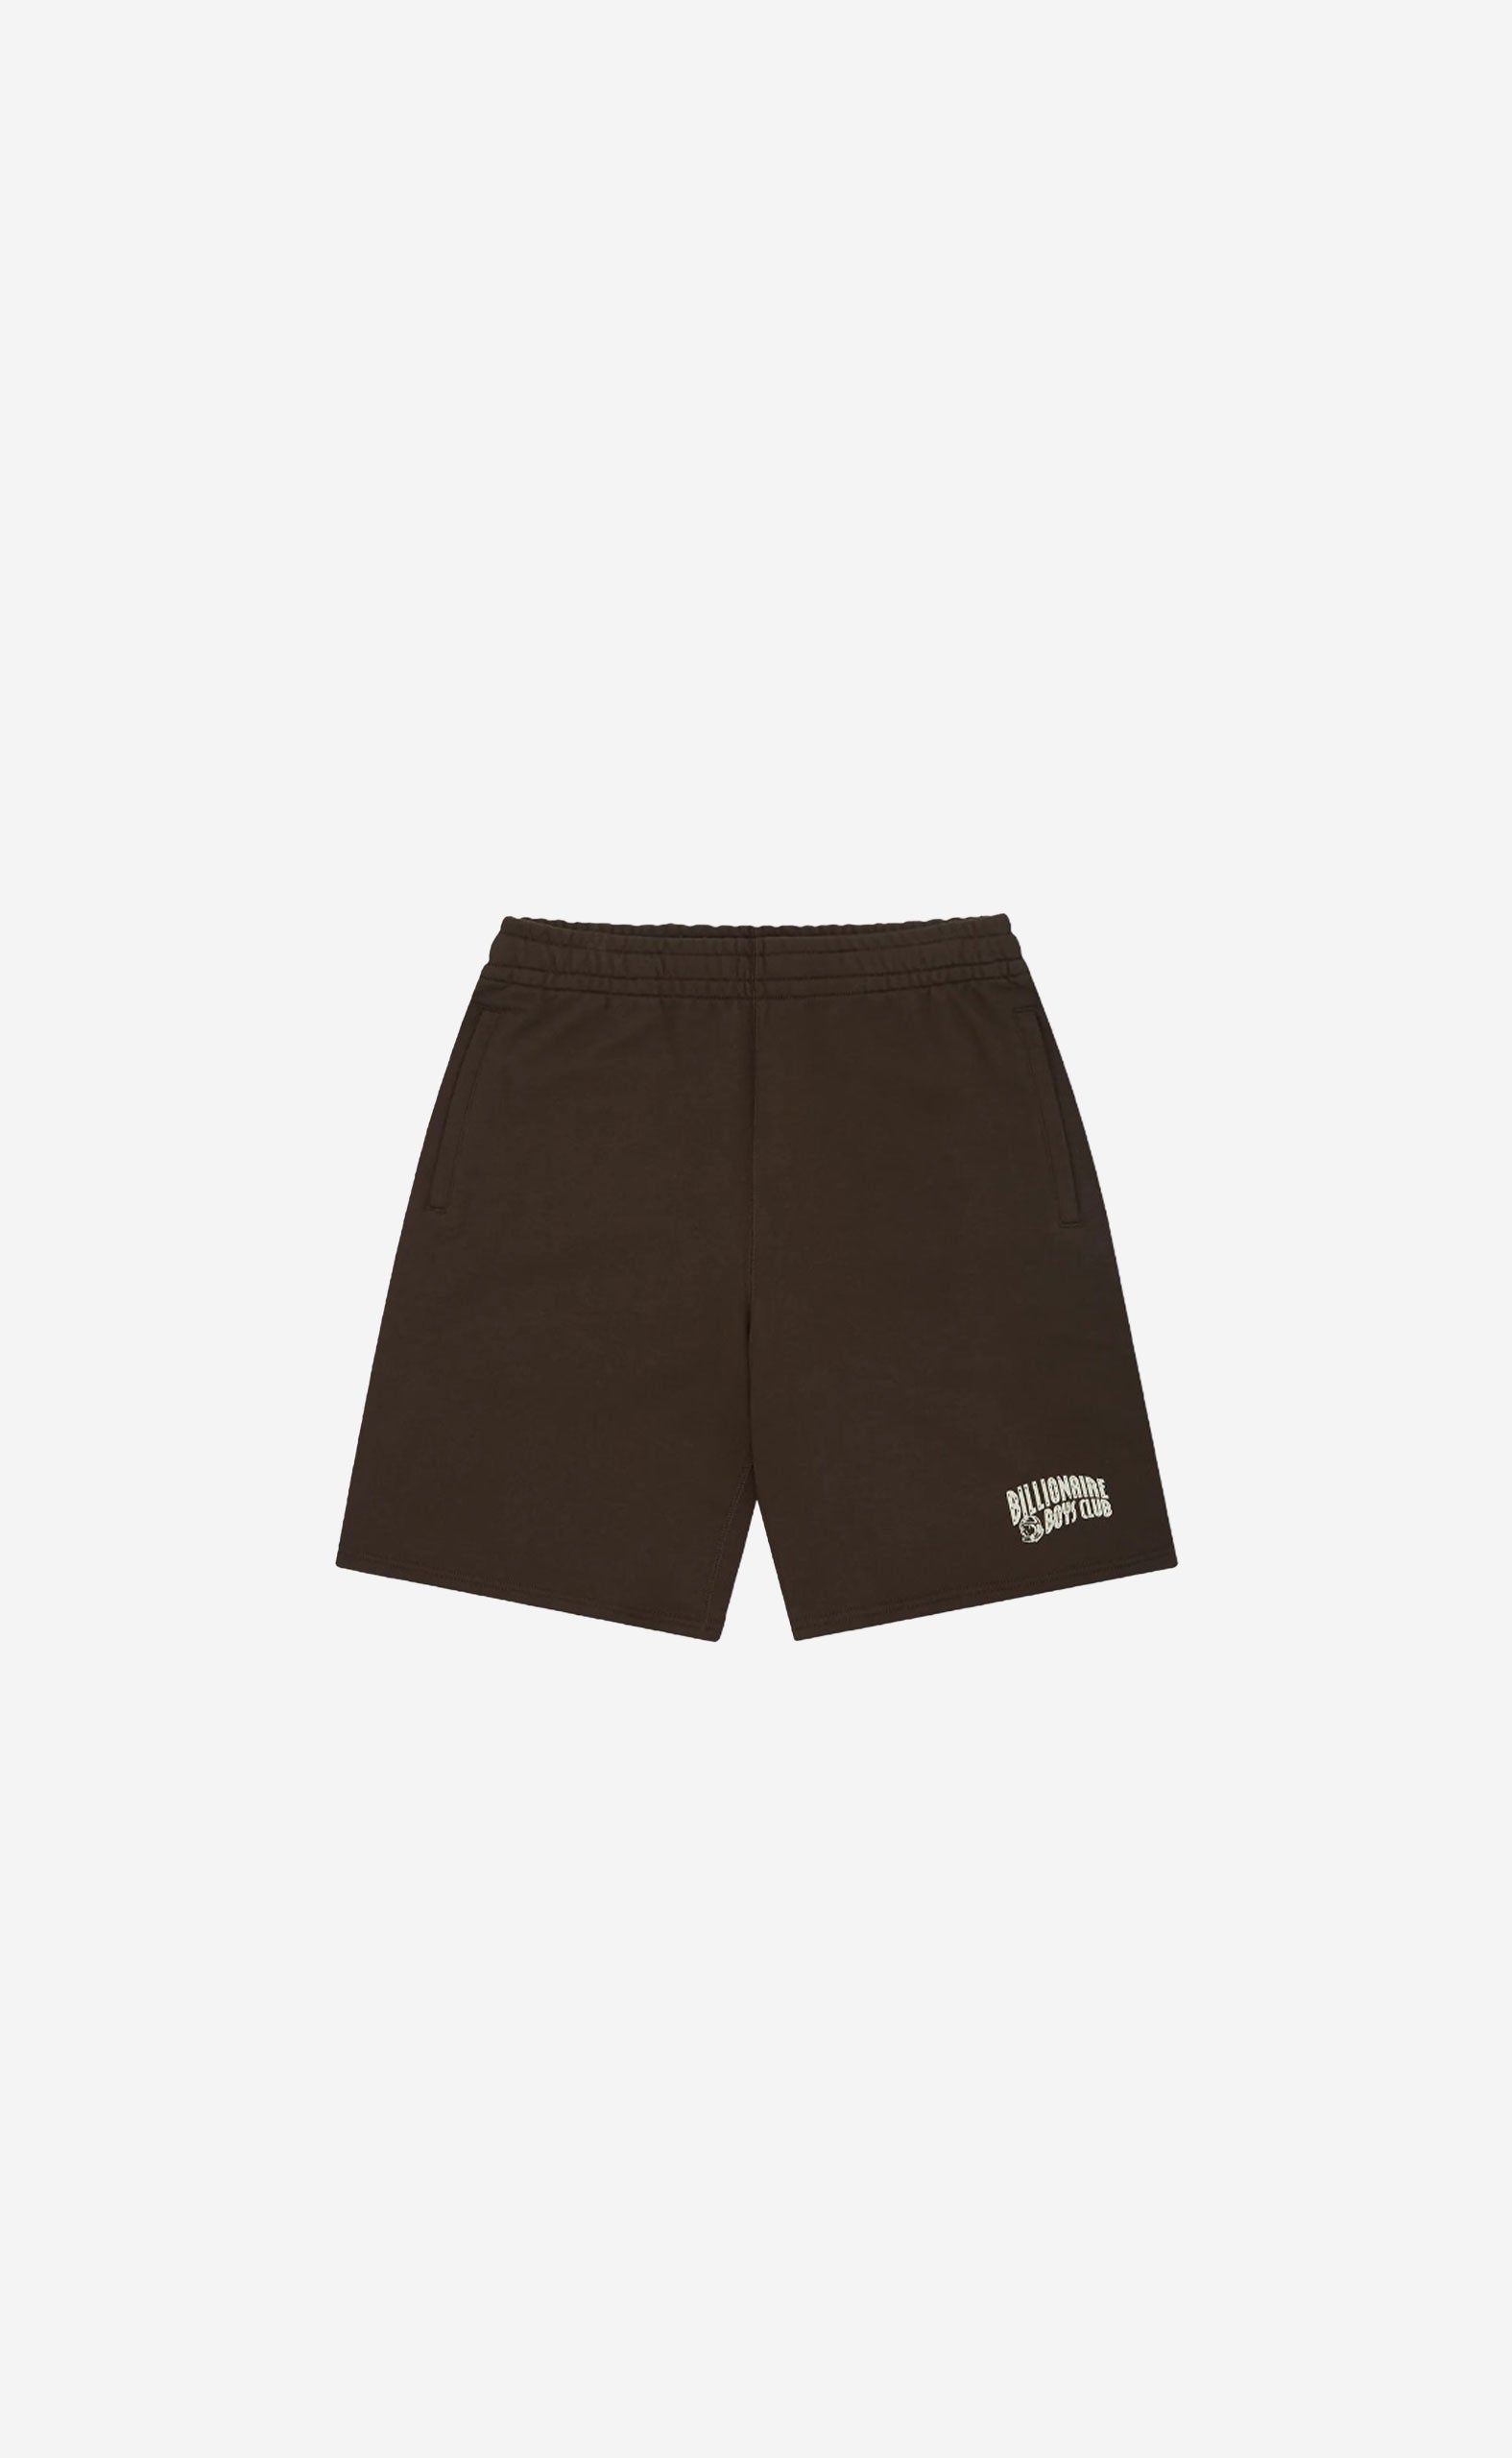 BROWN SMALL ARCH LOGO SHORTS